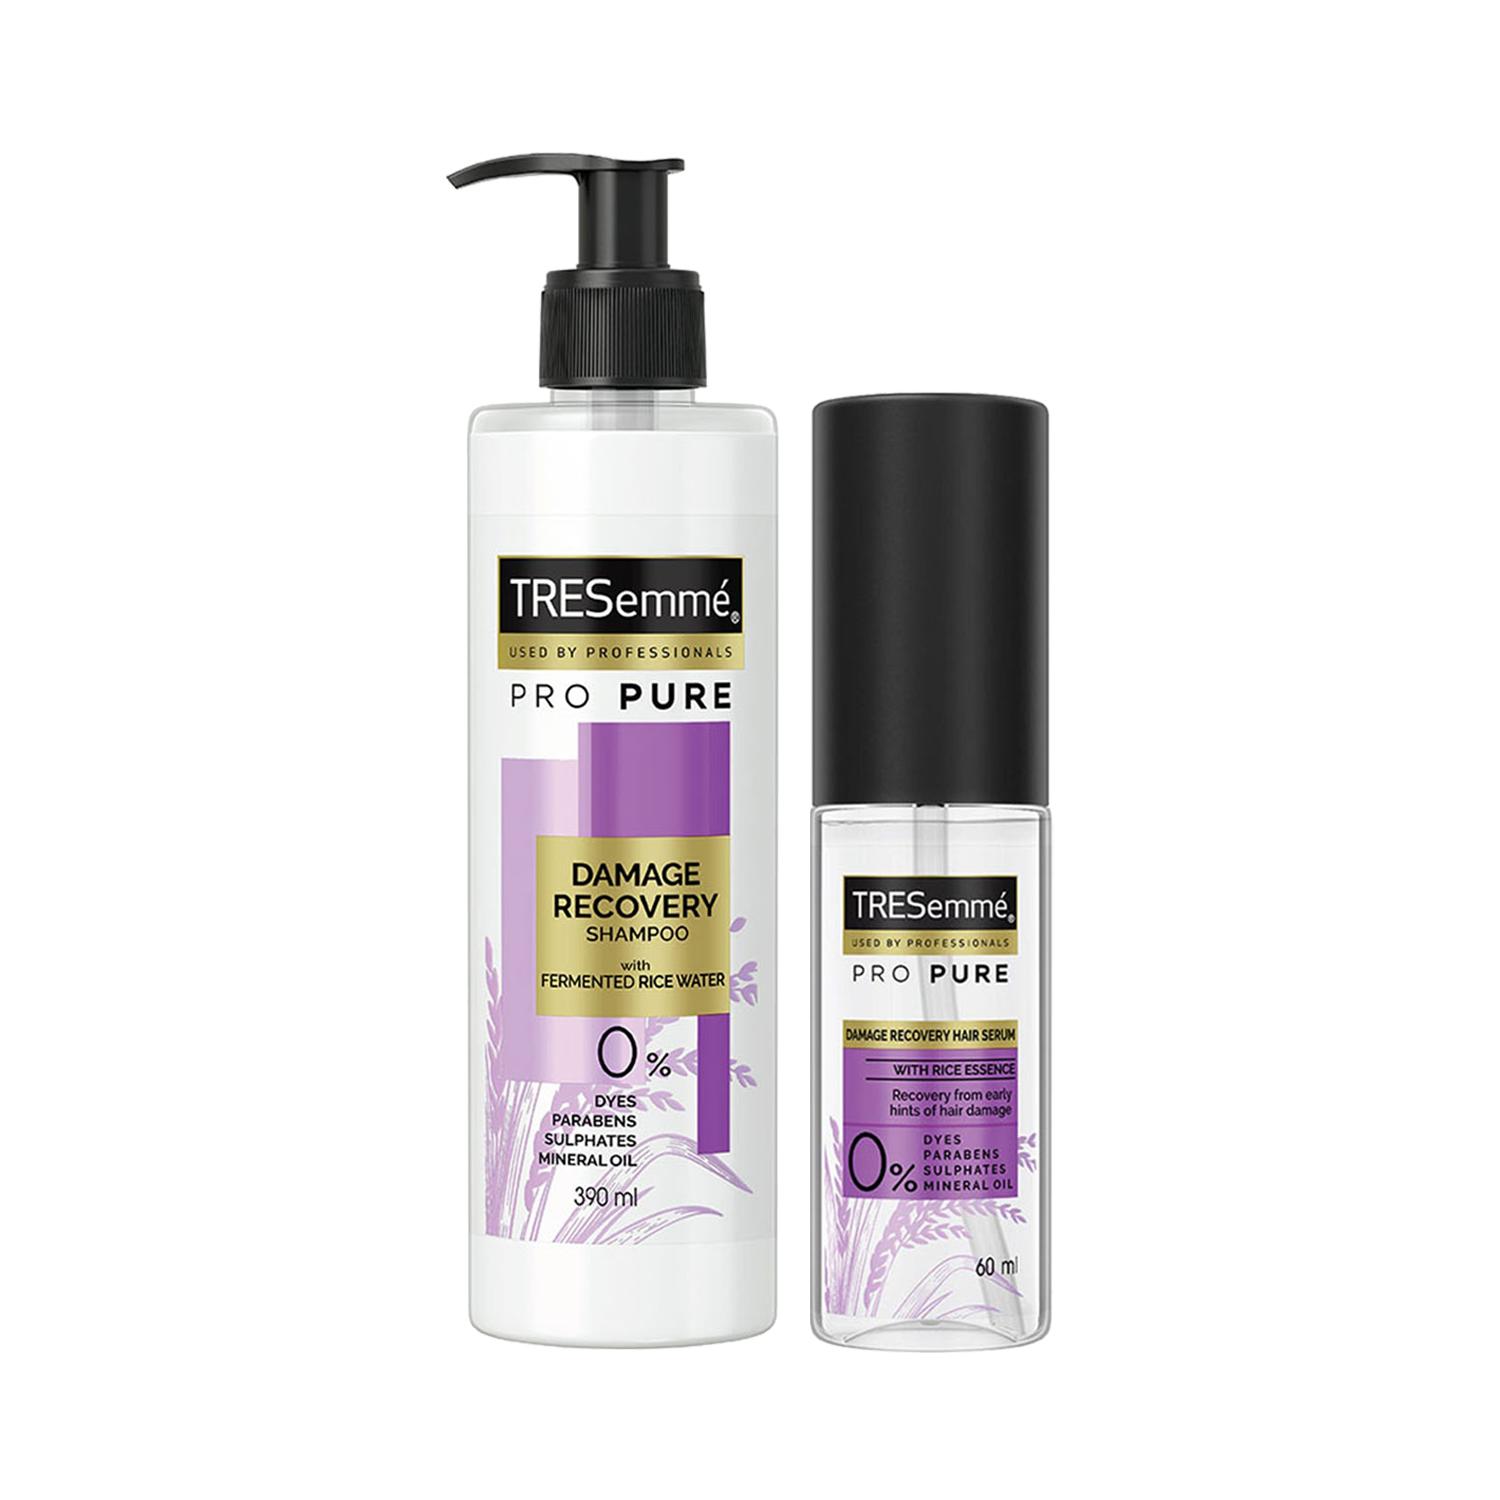 Tresemme Pro Pure Damage Recovery Kit With Fermented Rice Water - Shampoo + Serum Combo